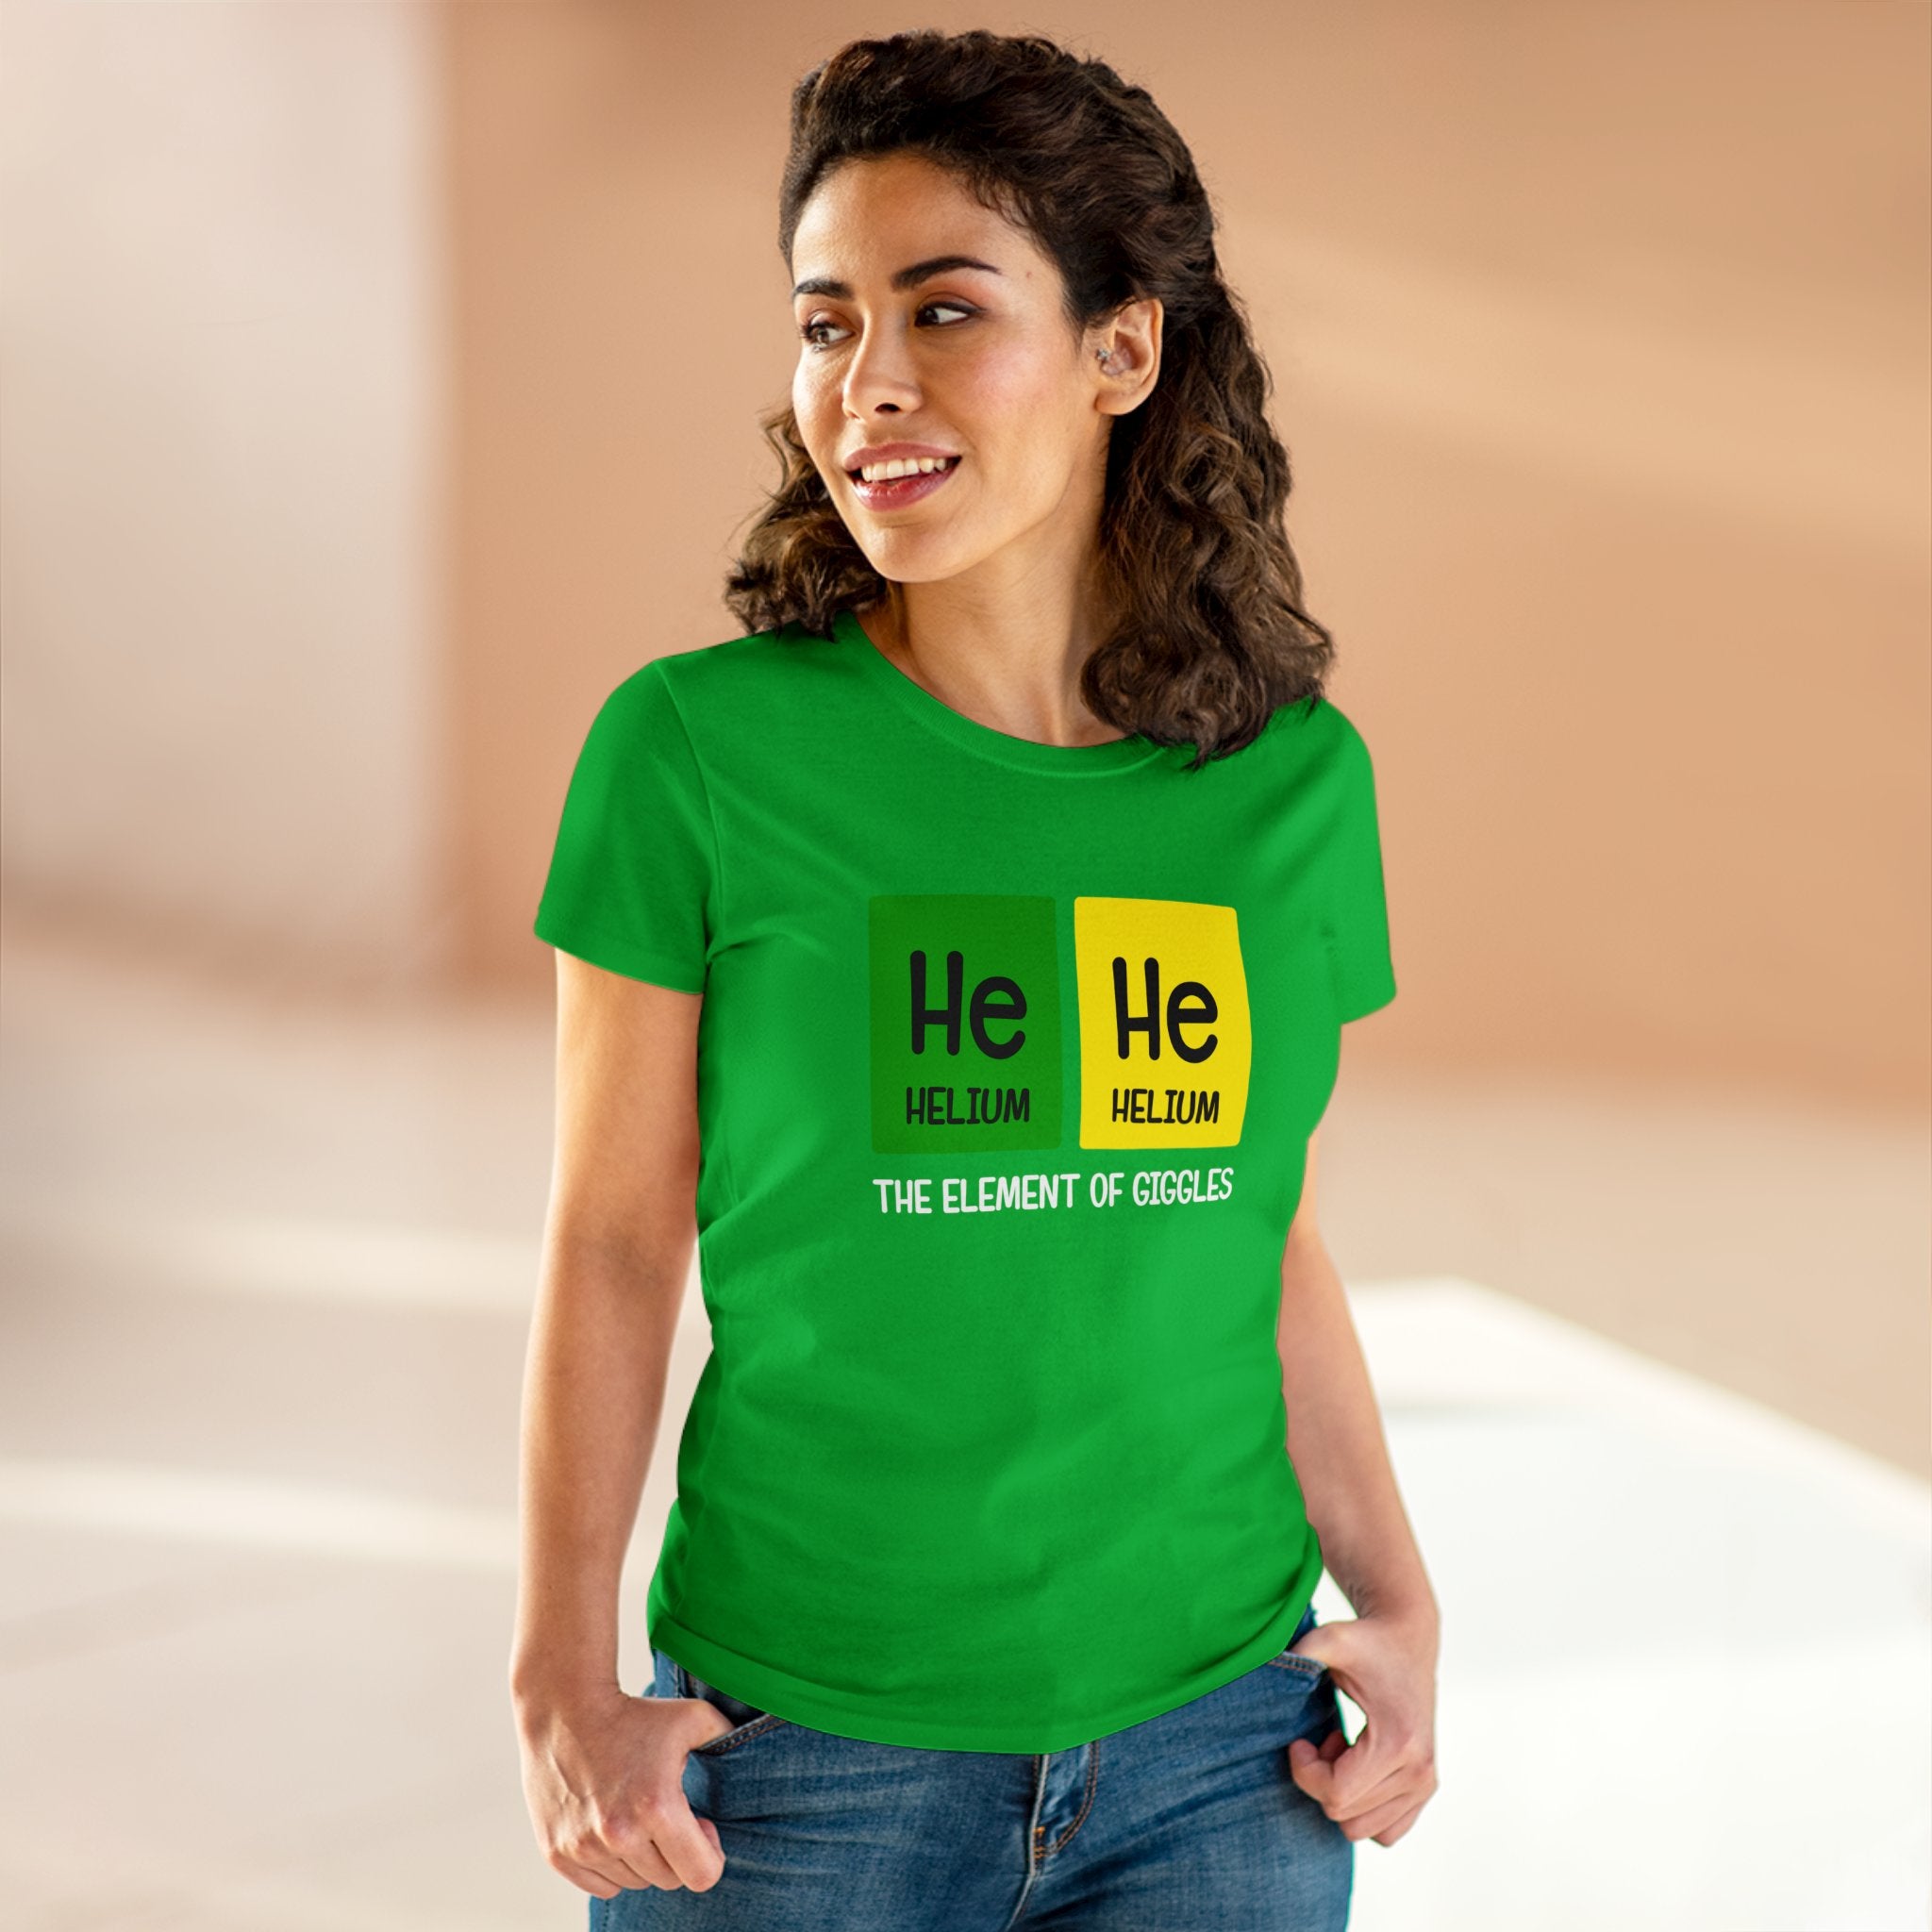 A person wearing an ultra-cozy He-He - Women'sTee made from ethically grown US cotton, adorned with helium elements and the text "The element of giggles," stands indoors smiling.